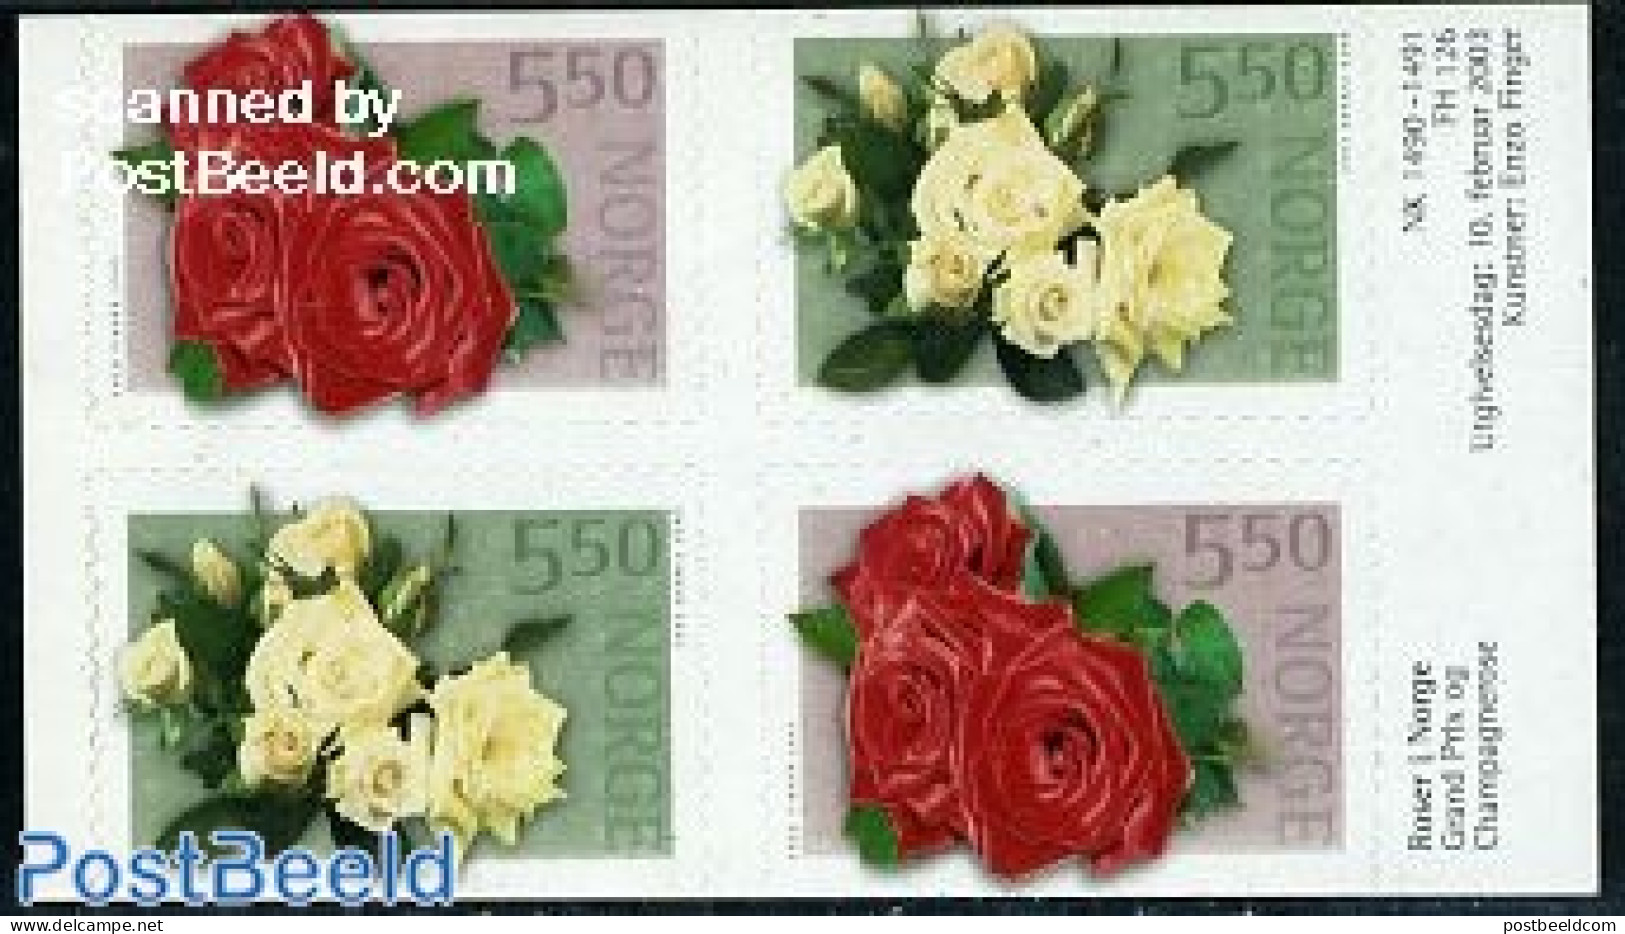 Norway 2003 Roses 4v From Booklet S-a, Mint NH, Nature - Flowers & Plants - Roses - Unused Stamps